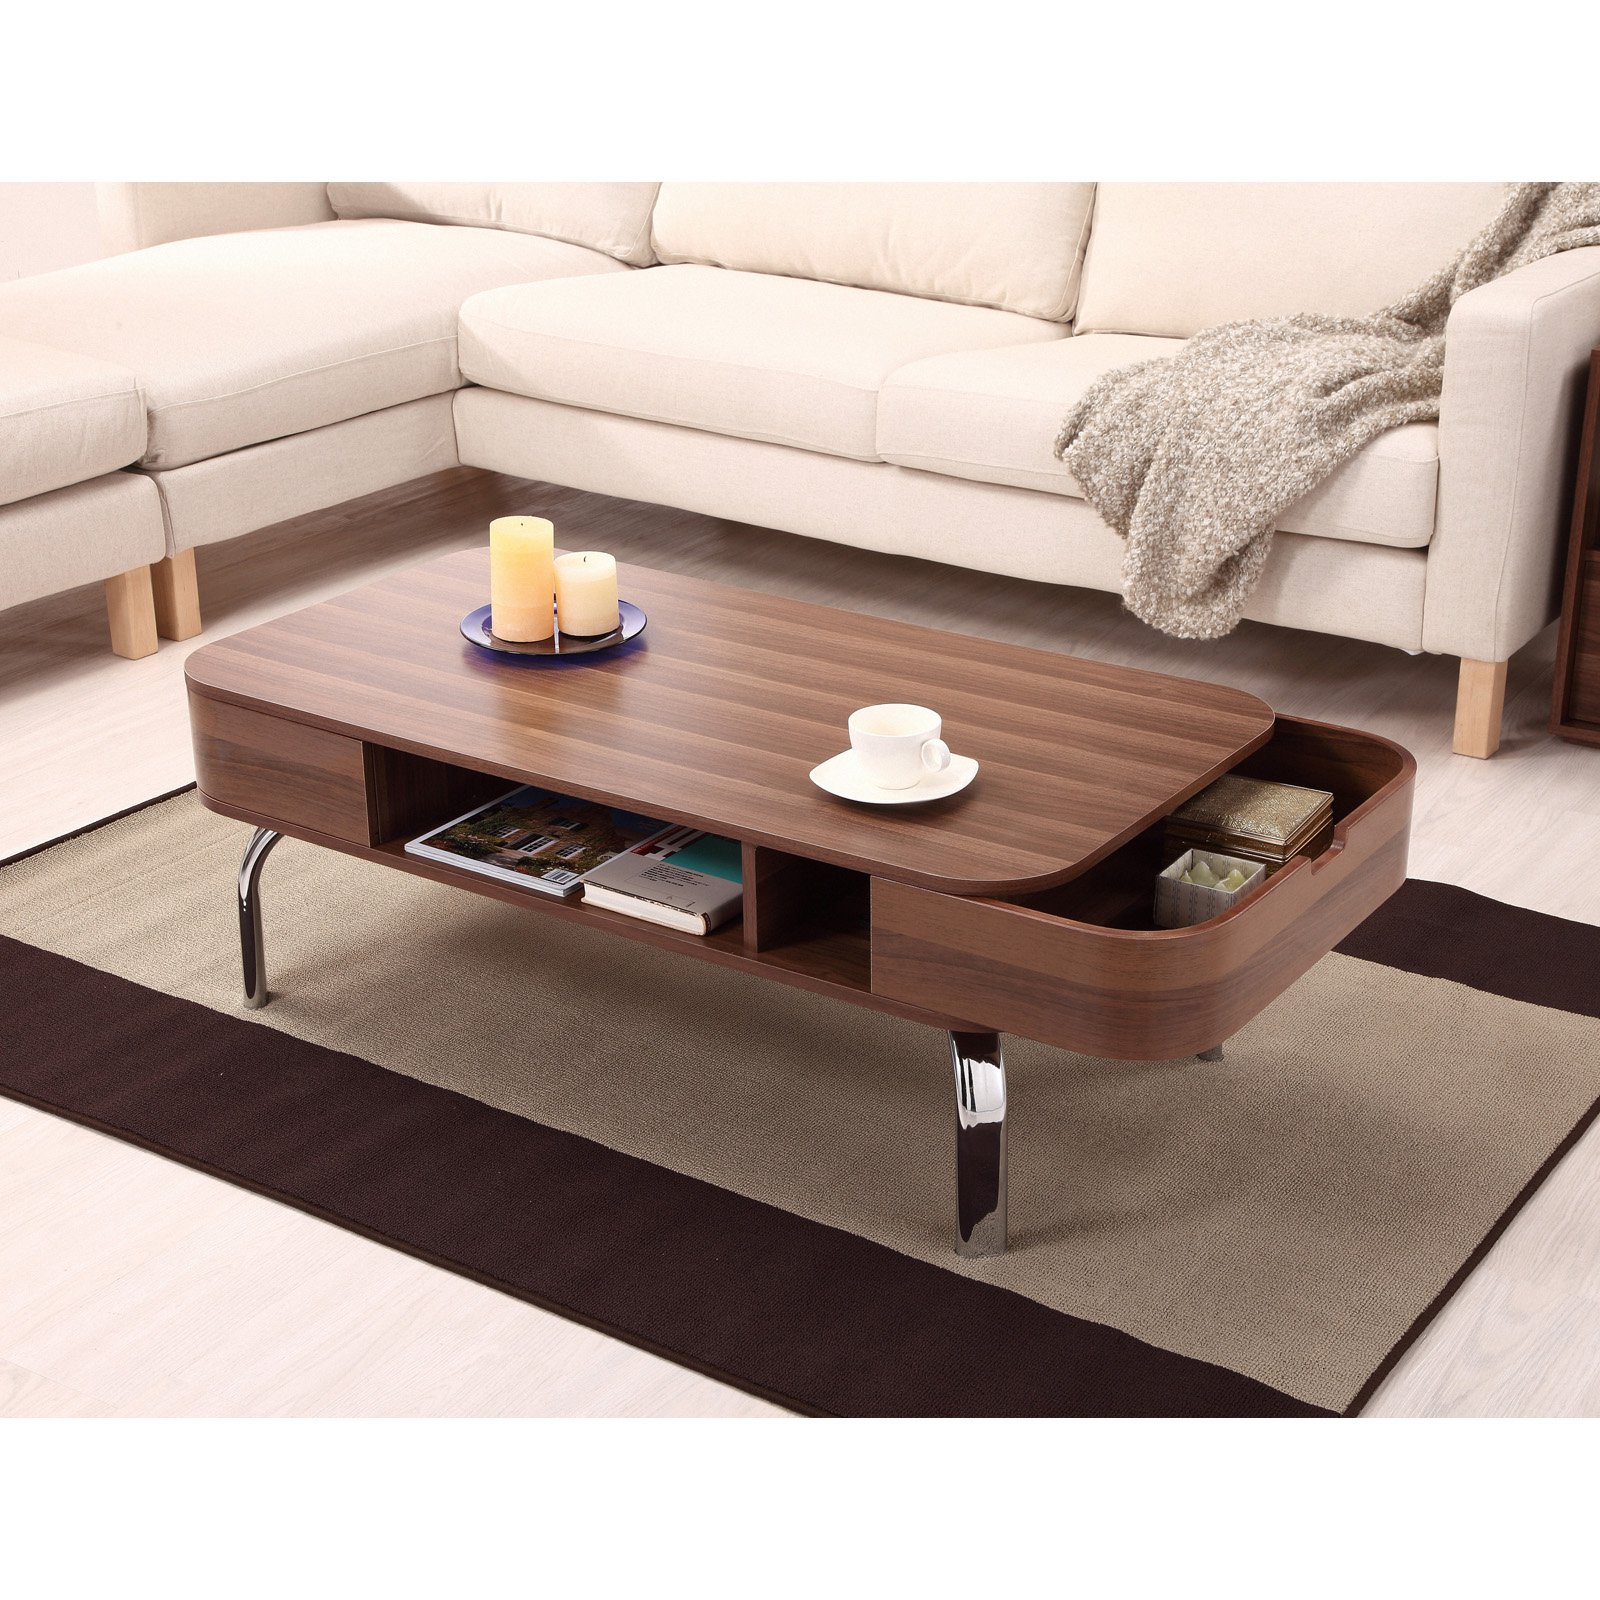 Coffee Table Rounded Corners Hipenmoedernl within measurements 1600 X 1600